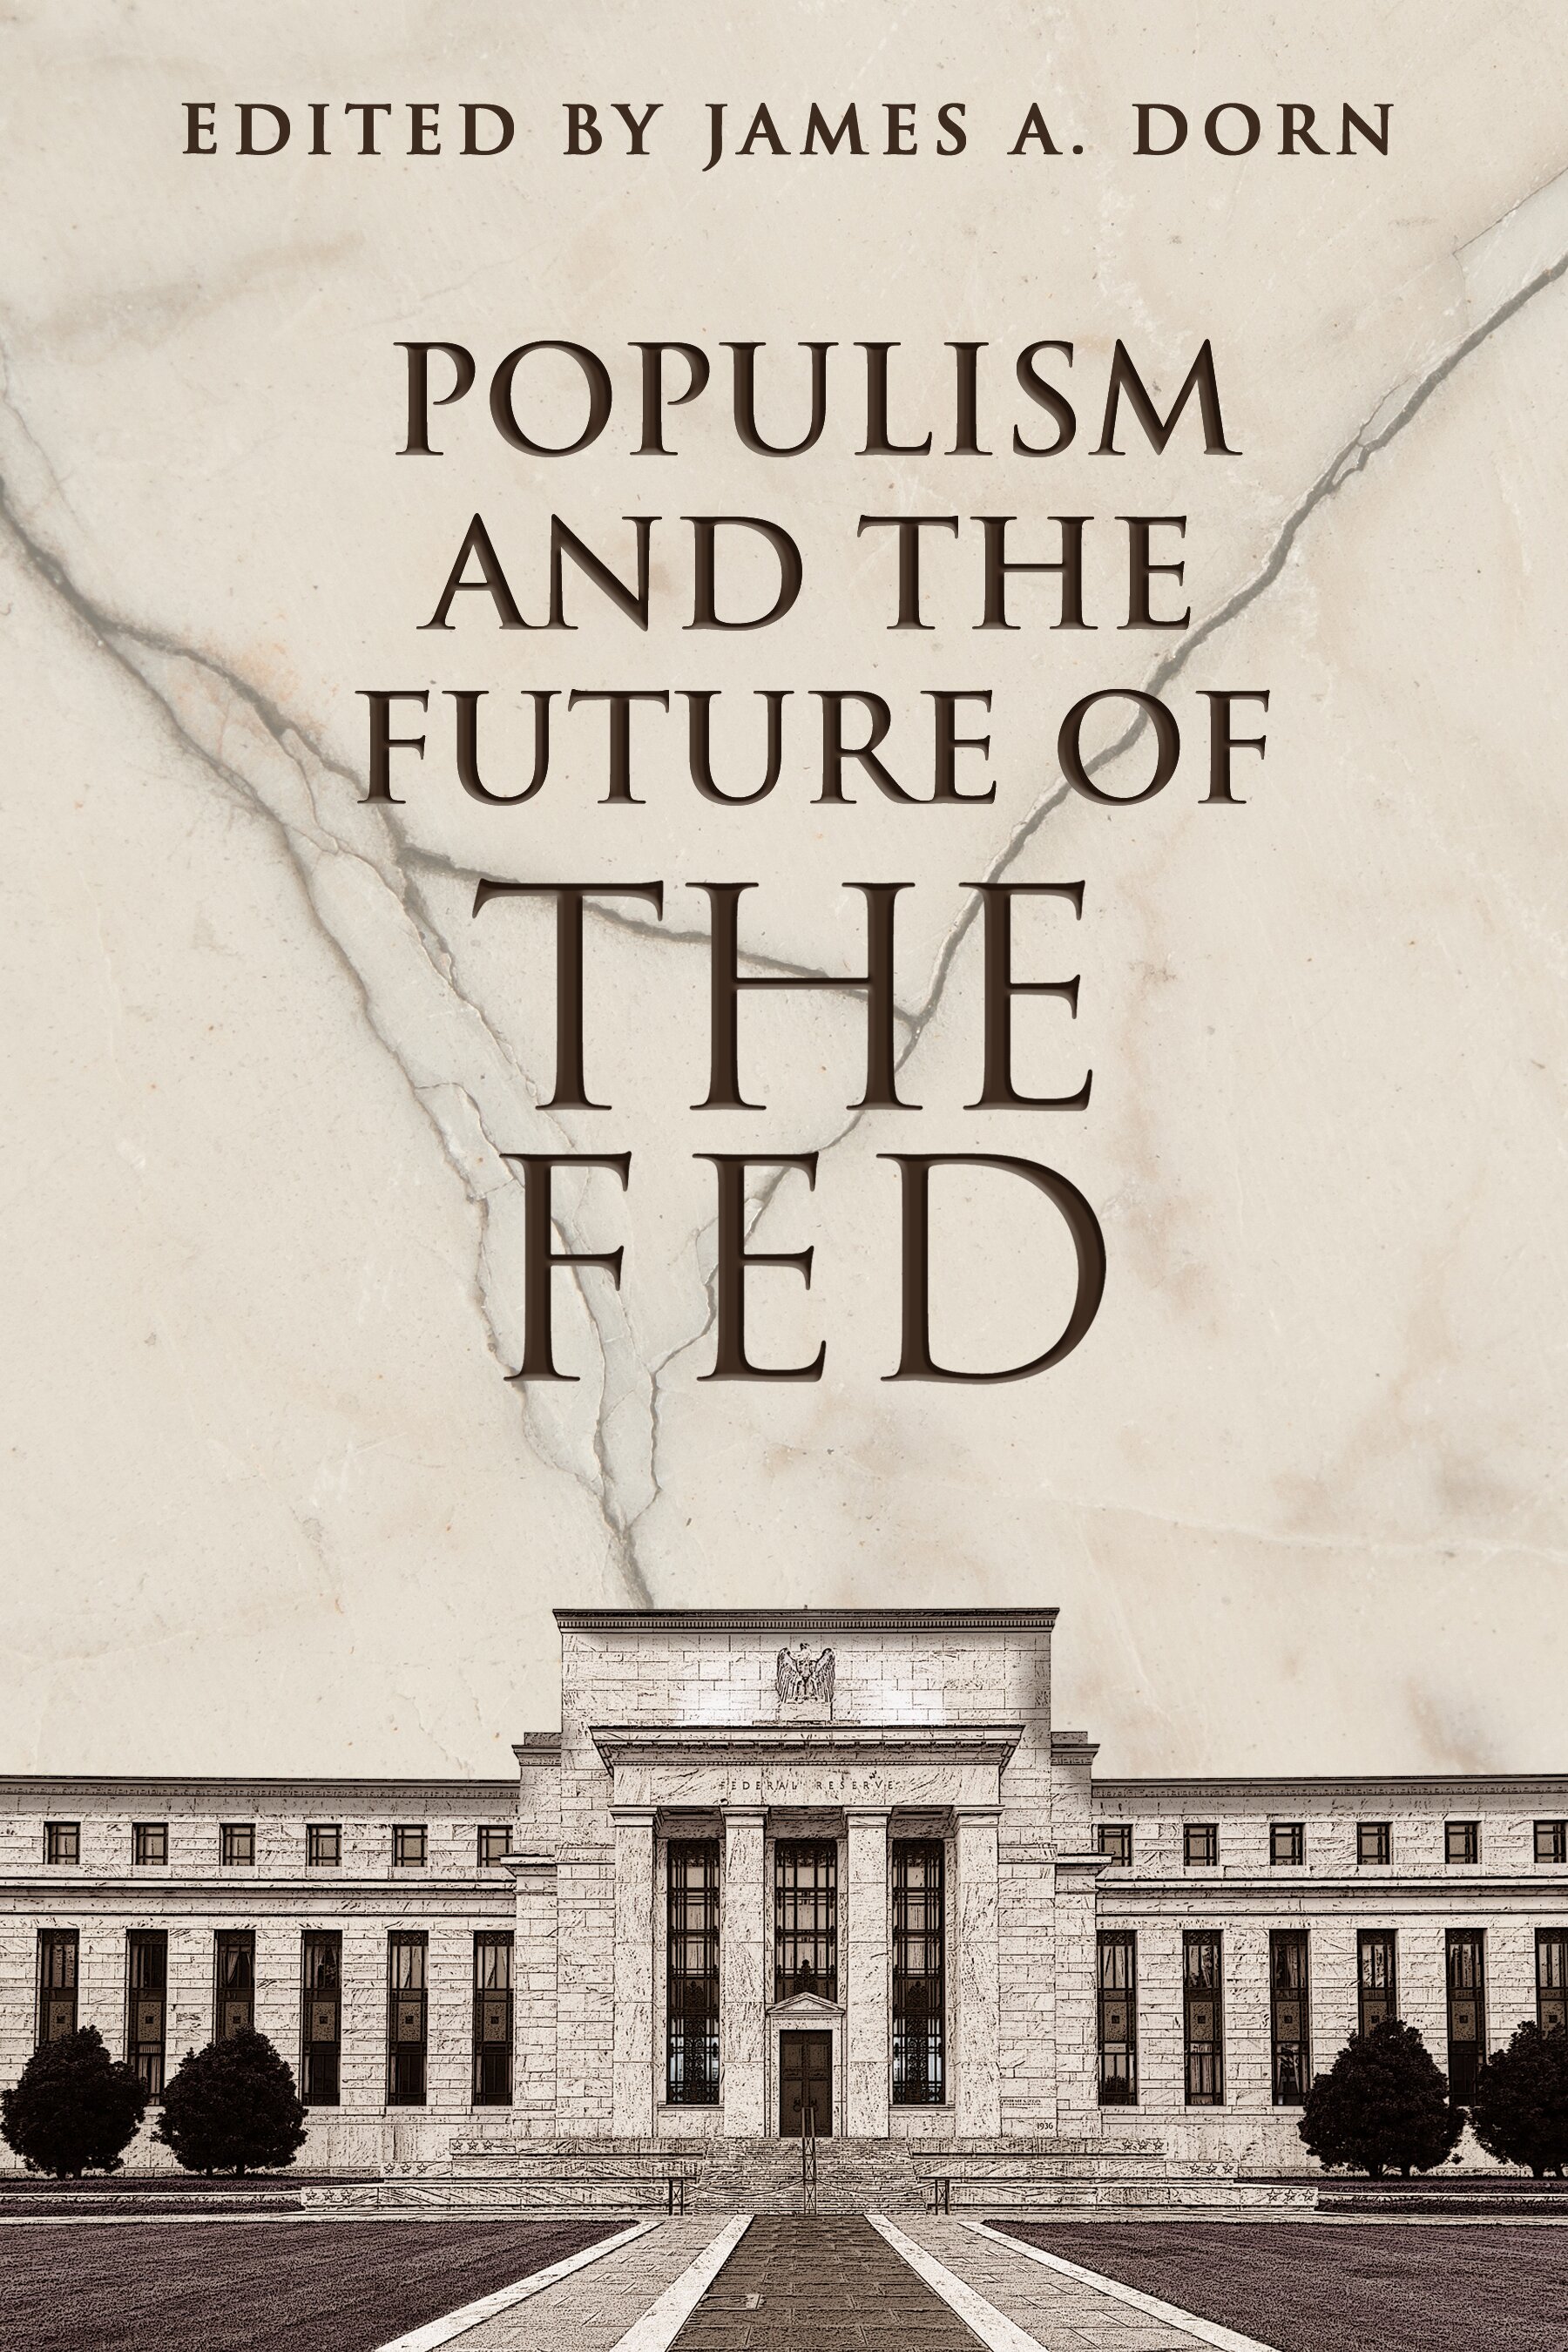 Populism and the Future of the Fed by James A. Dorn